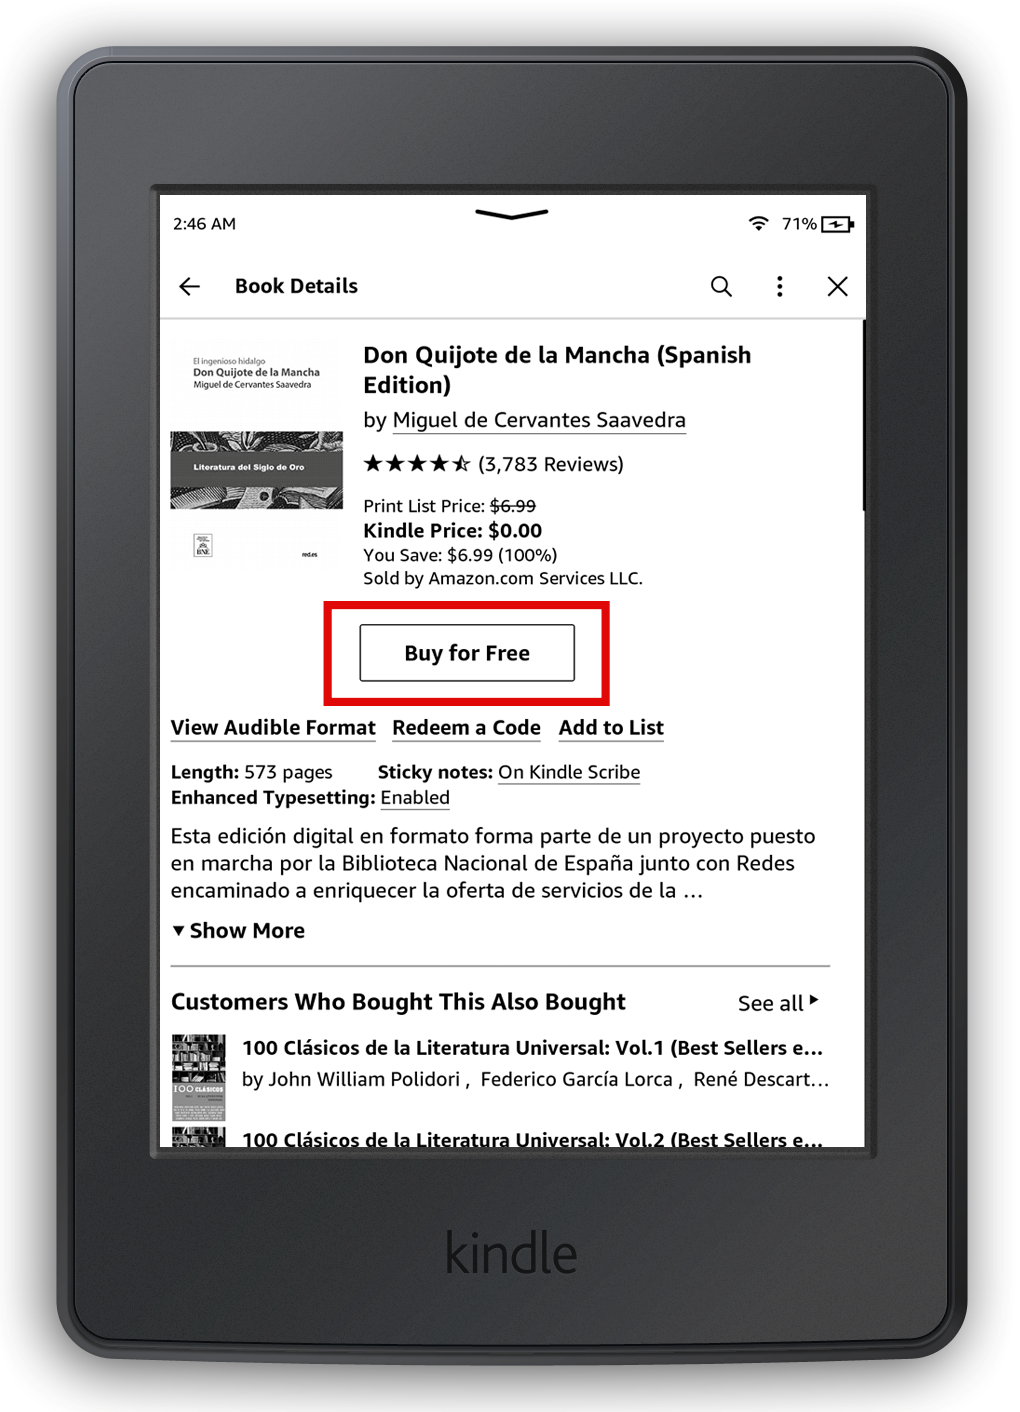 Kindle Paperwhite Product Listing for Spanish copy of Don Quijote